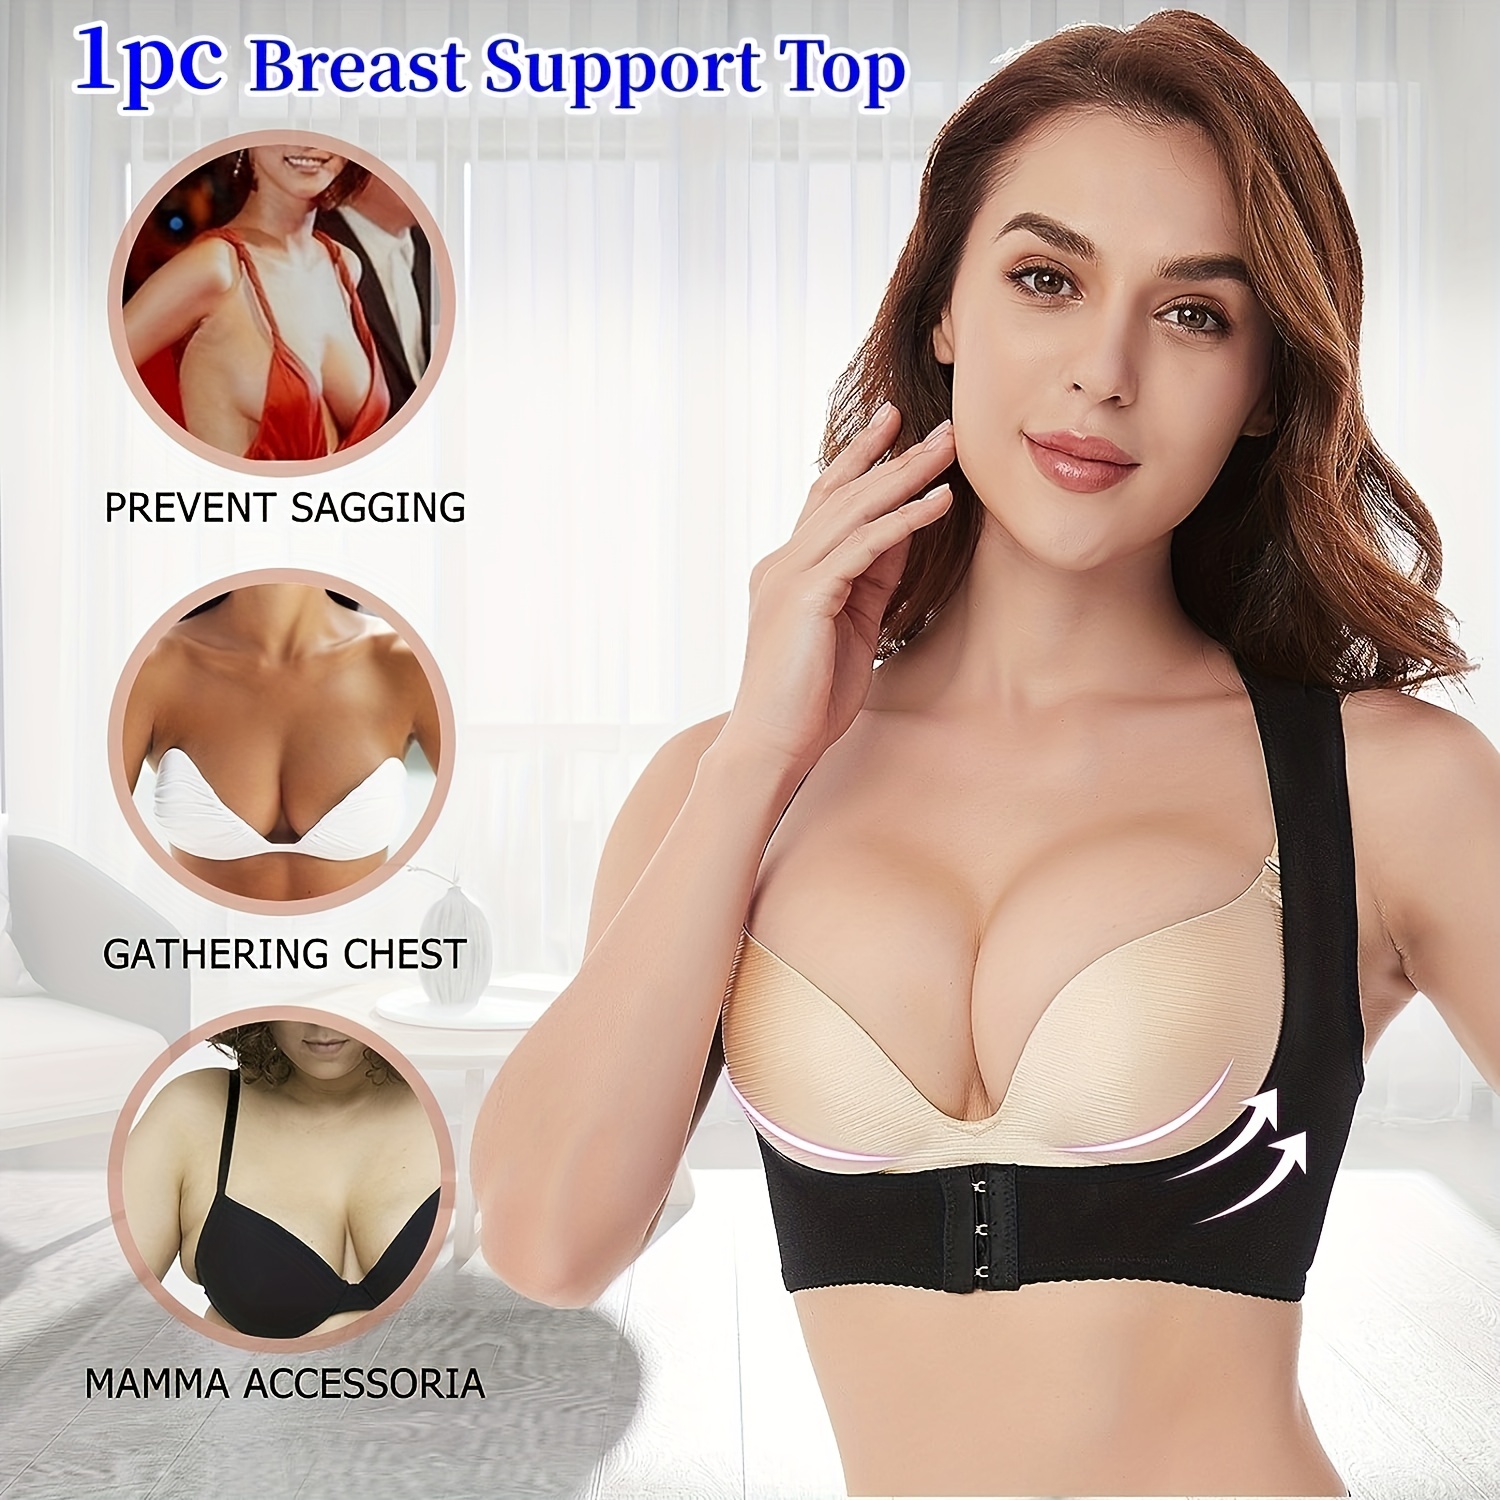 5M 1 Roll Invisible Breast Lift Tape Push Up Sticky Bra Strapless Backless  Bra Tape Breathable Boob Tape for Women Breast Nipple Covers Adhesive Bras  Intimates Sexy Bralette Fits All Cups Beige